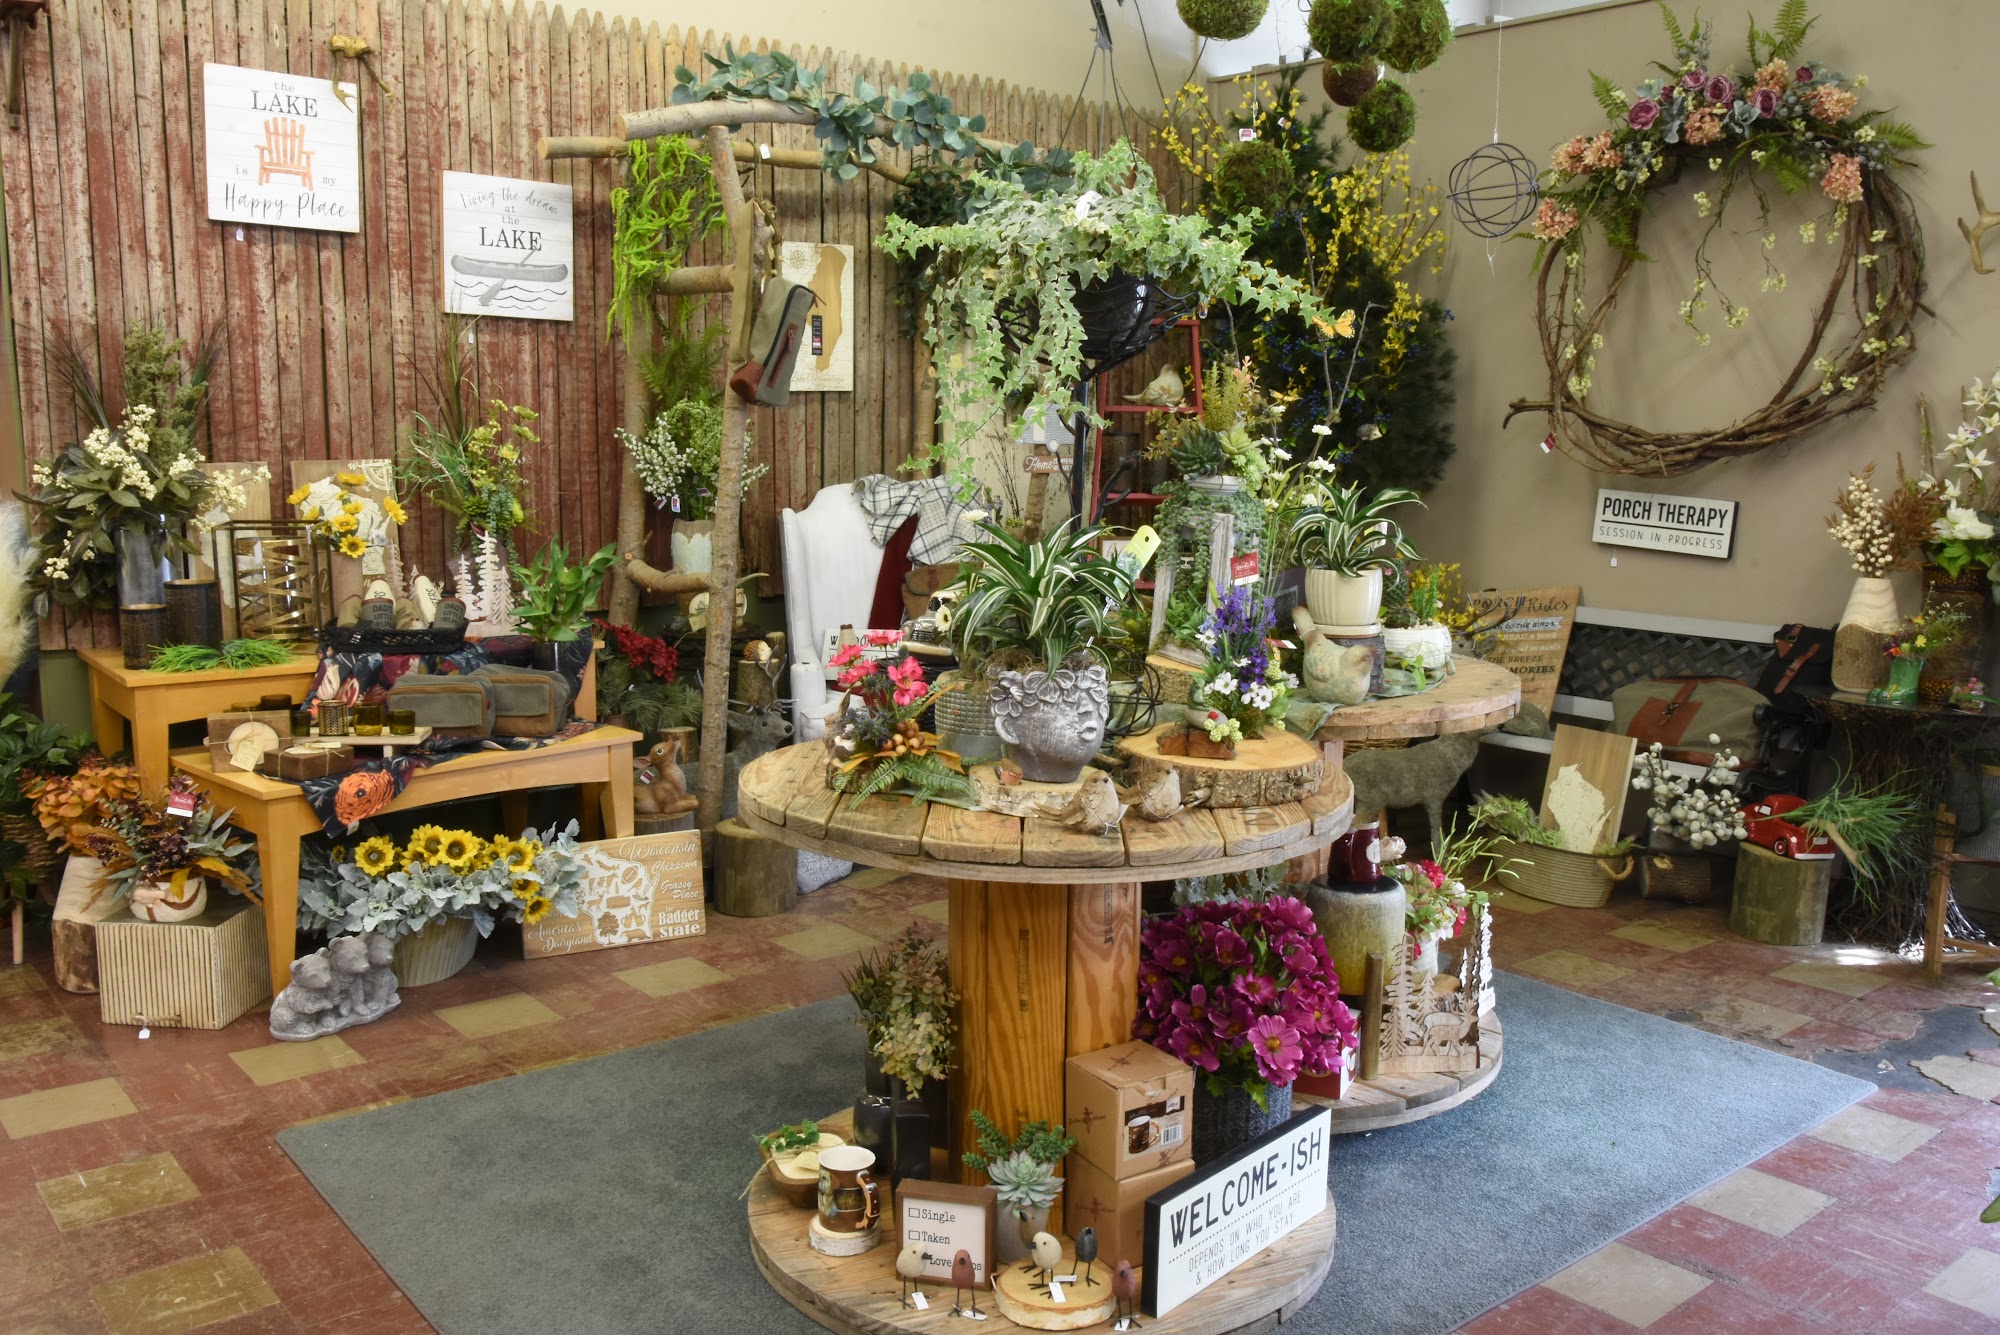 Wood's Floral & Gifts